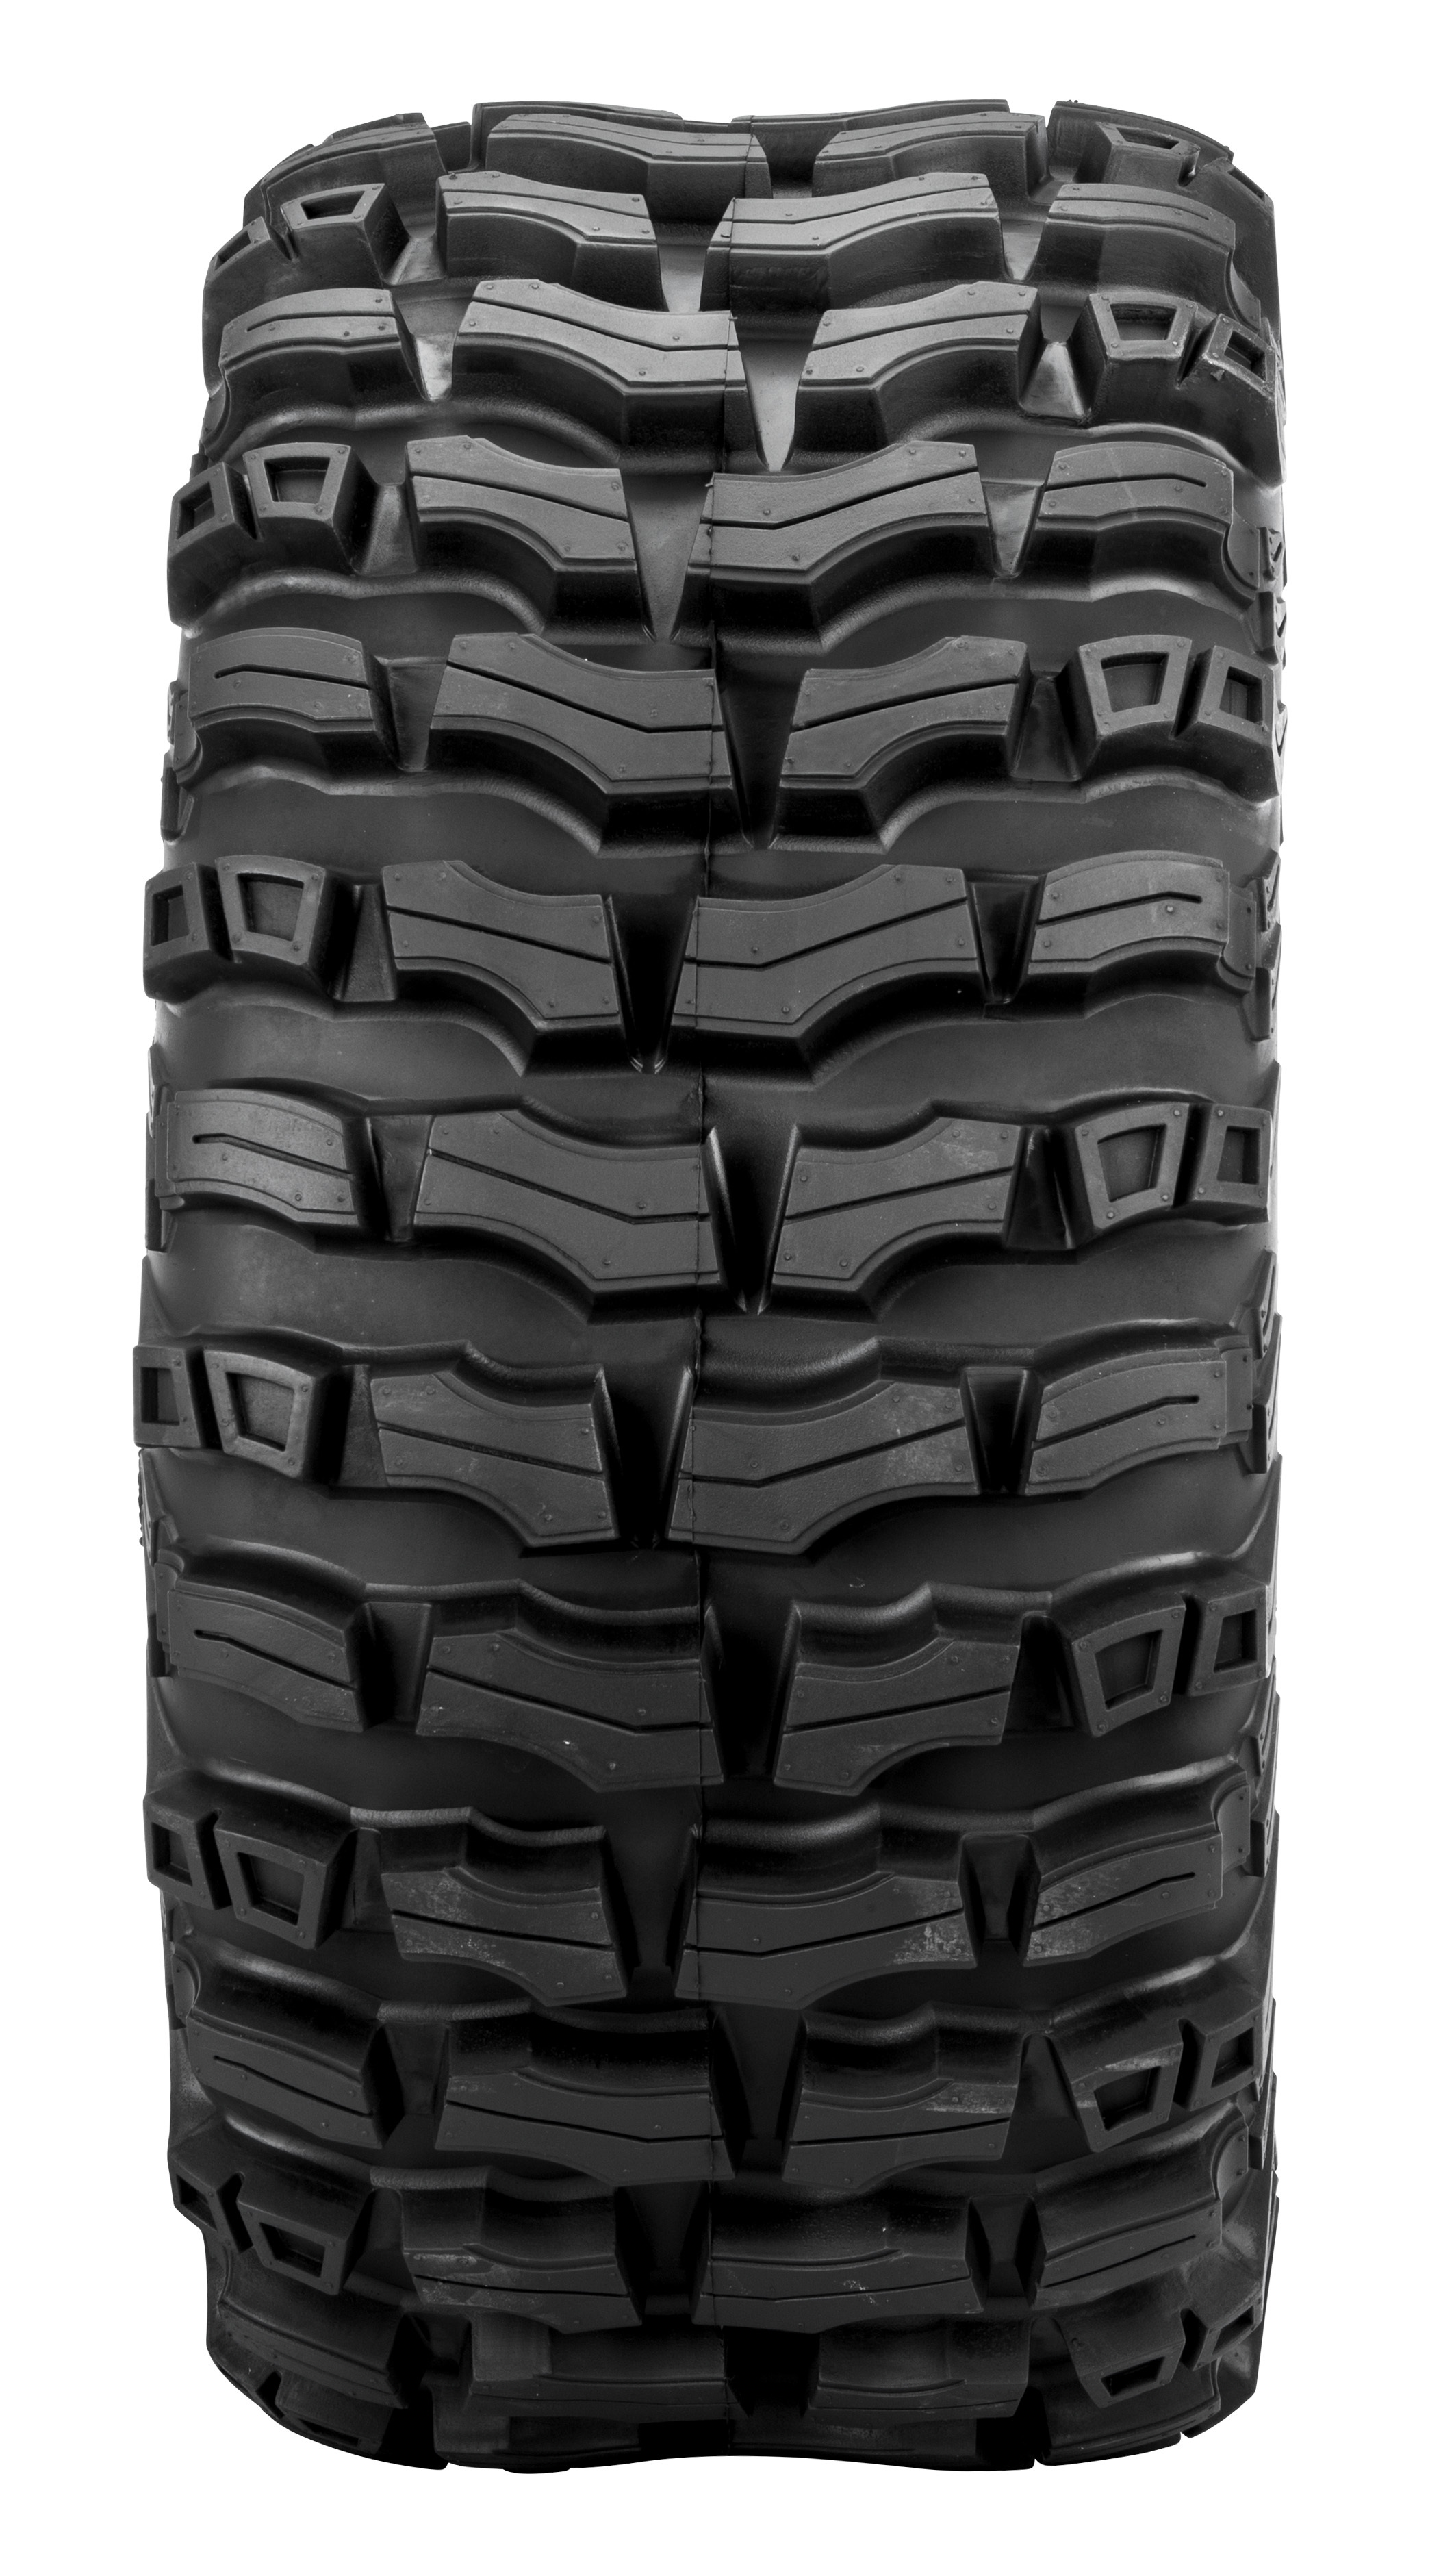 24X11Rx10 Buzz Saw R/T Tire - Click Image to Close